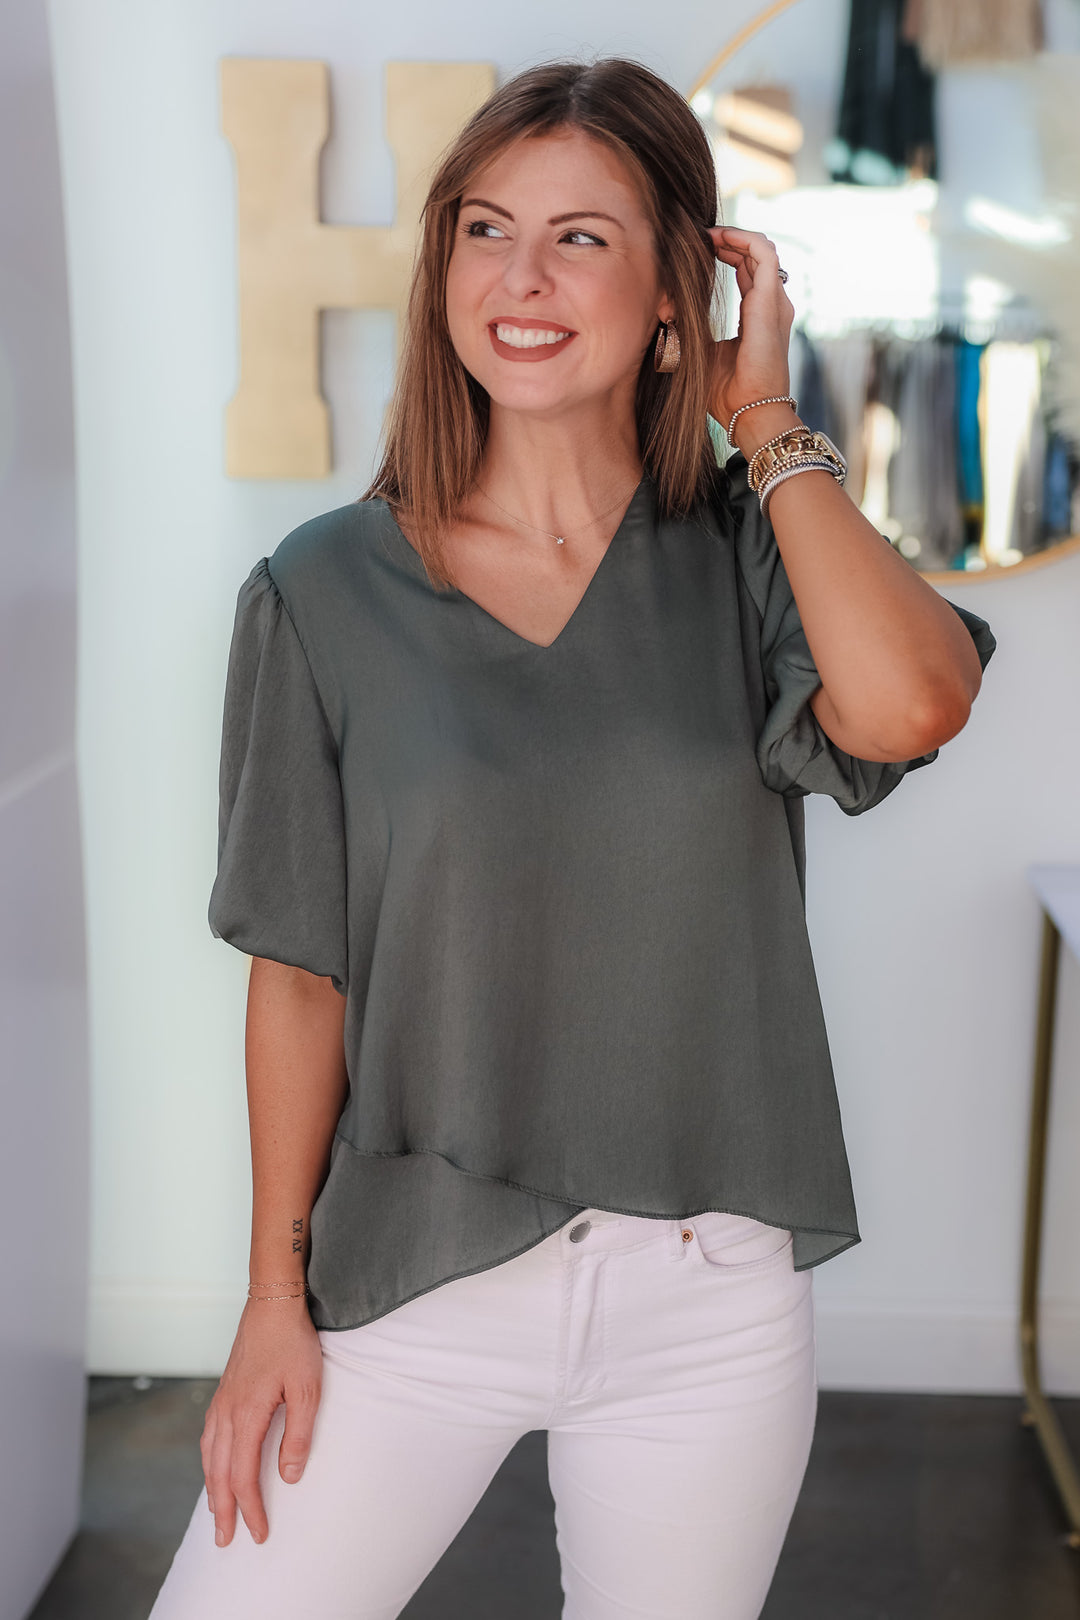 A brunette woman standing in a shop wearing an ash green, short bubble sleeve, v neck top with white jeans.